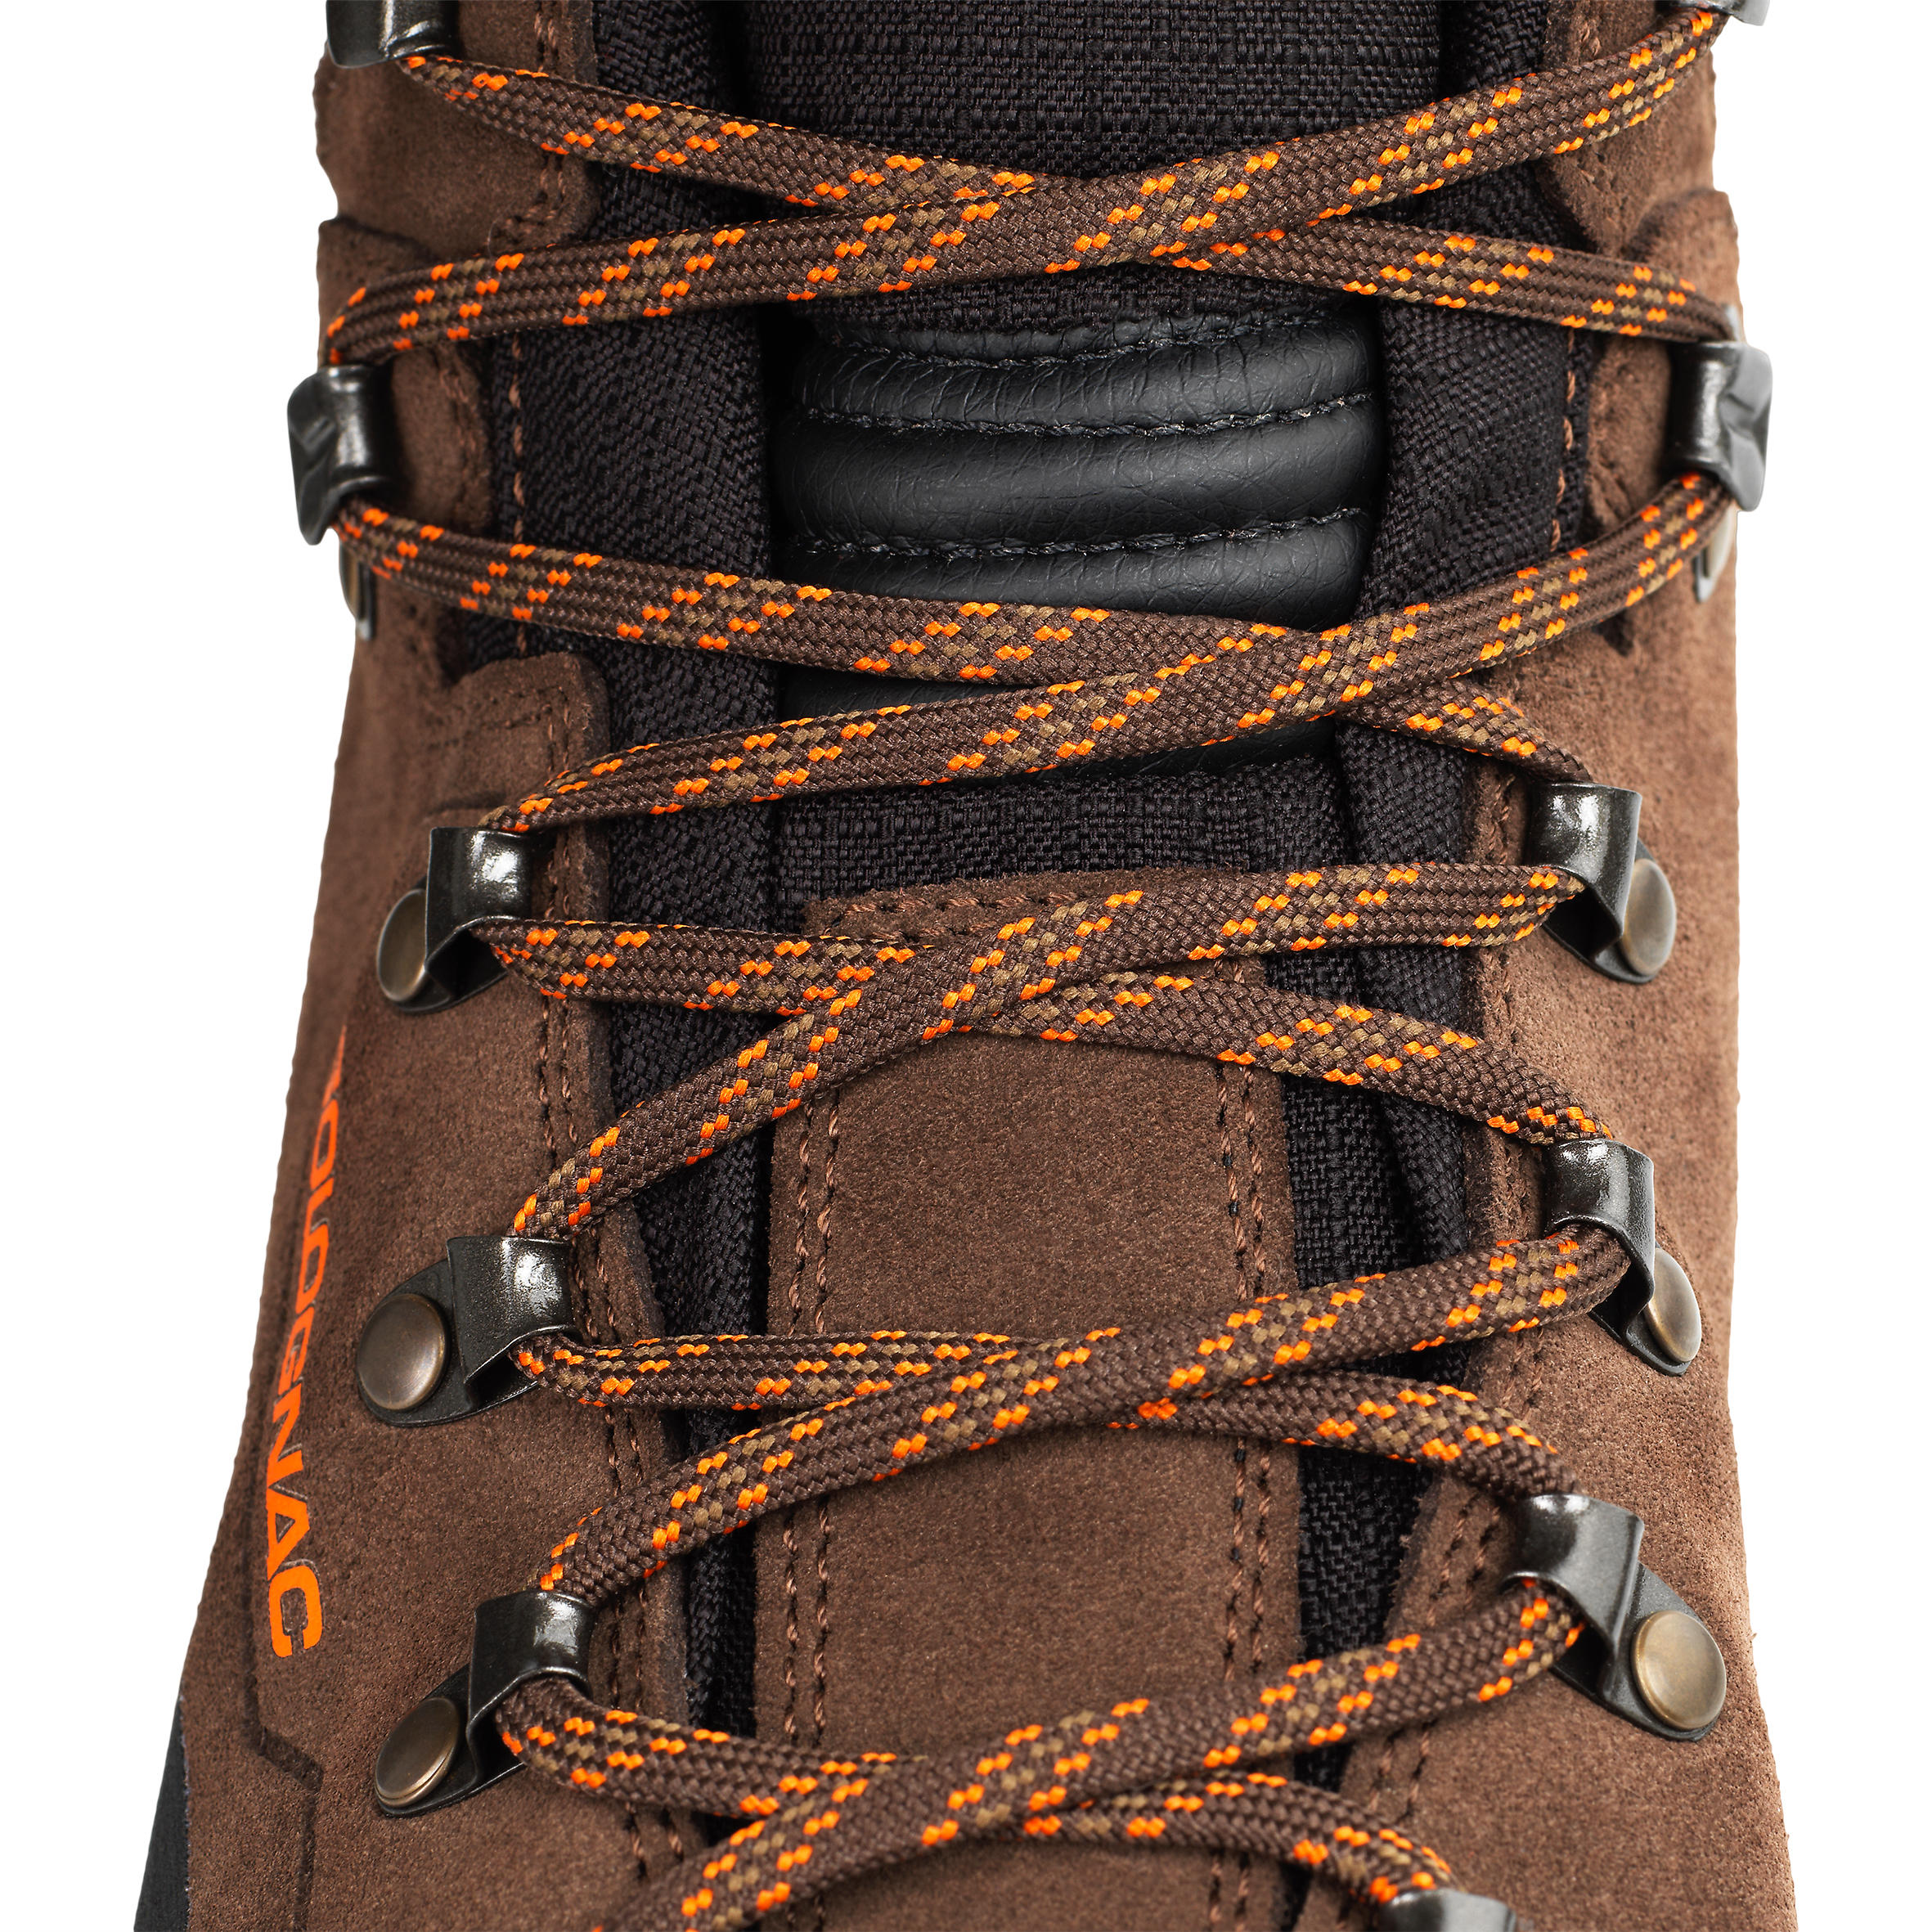 CROSSHUNT 500 WATERPROOF AND HARD-WEARING HUNTING BOOTS BROWN - SOLOGNAC